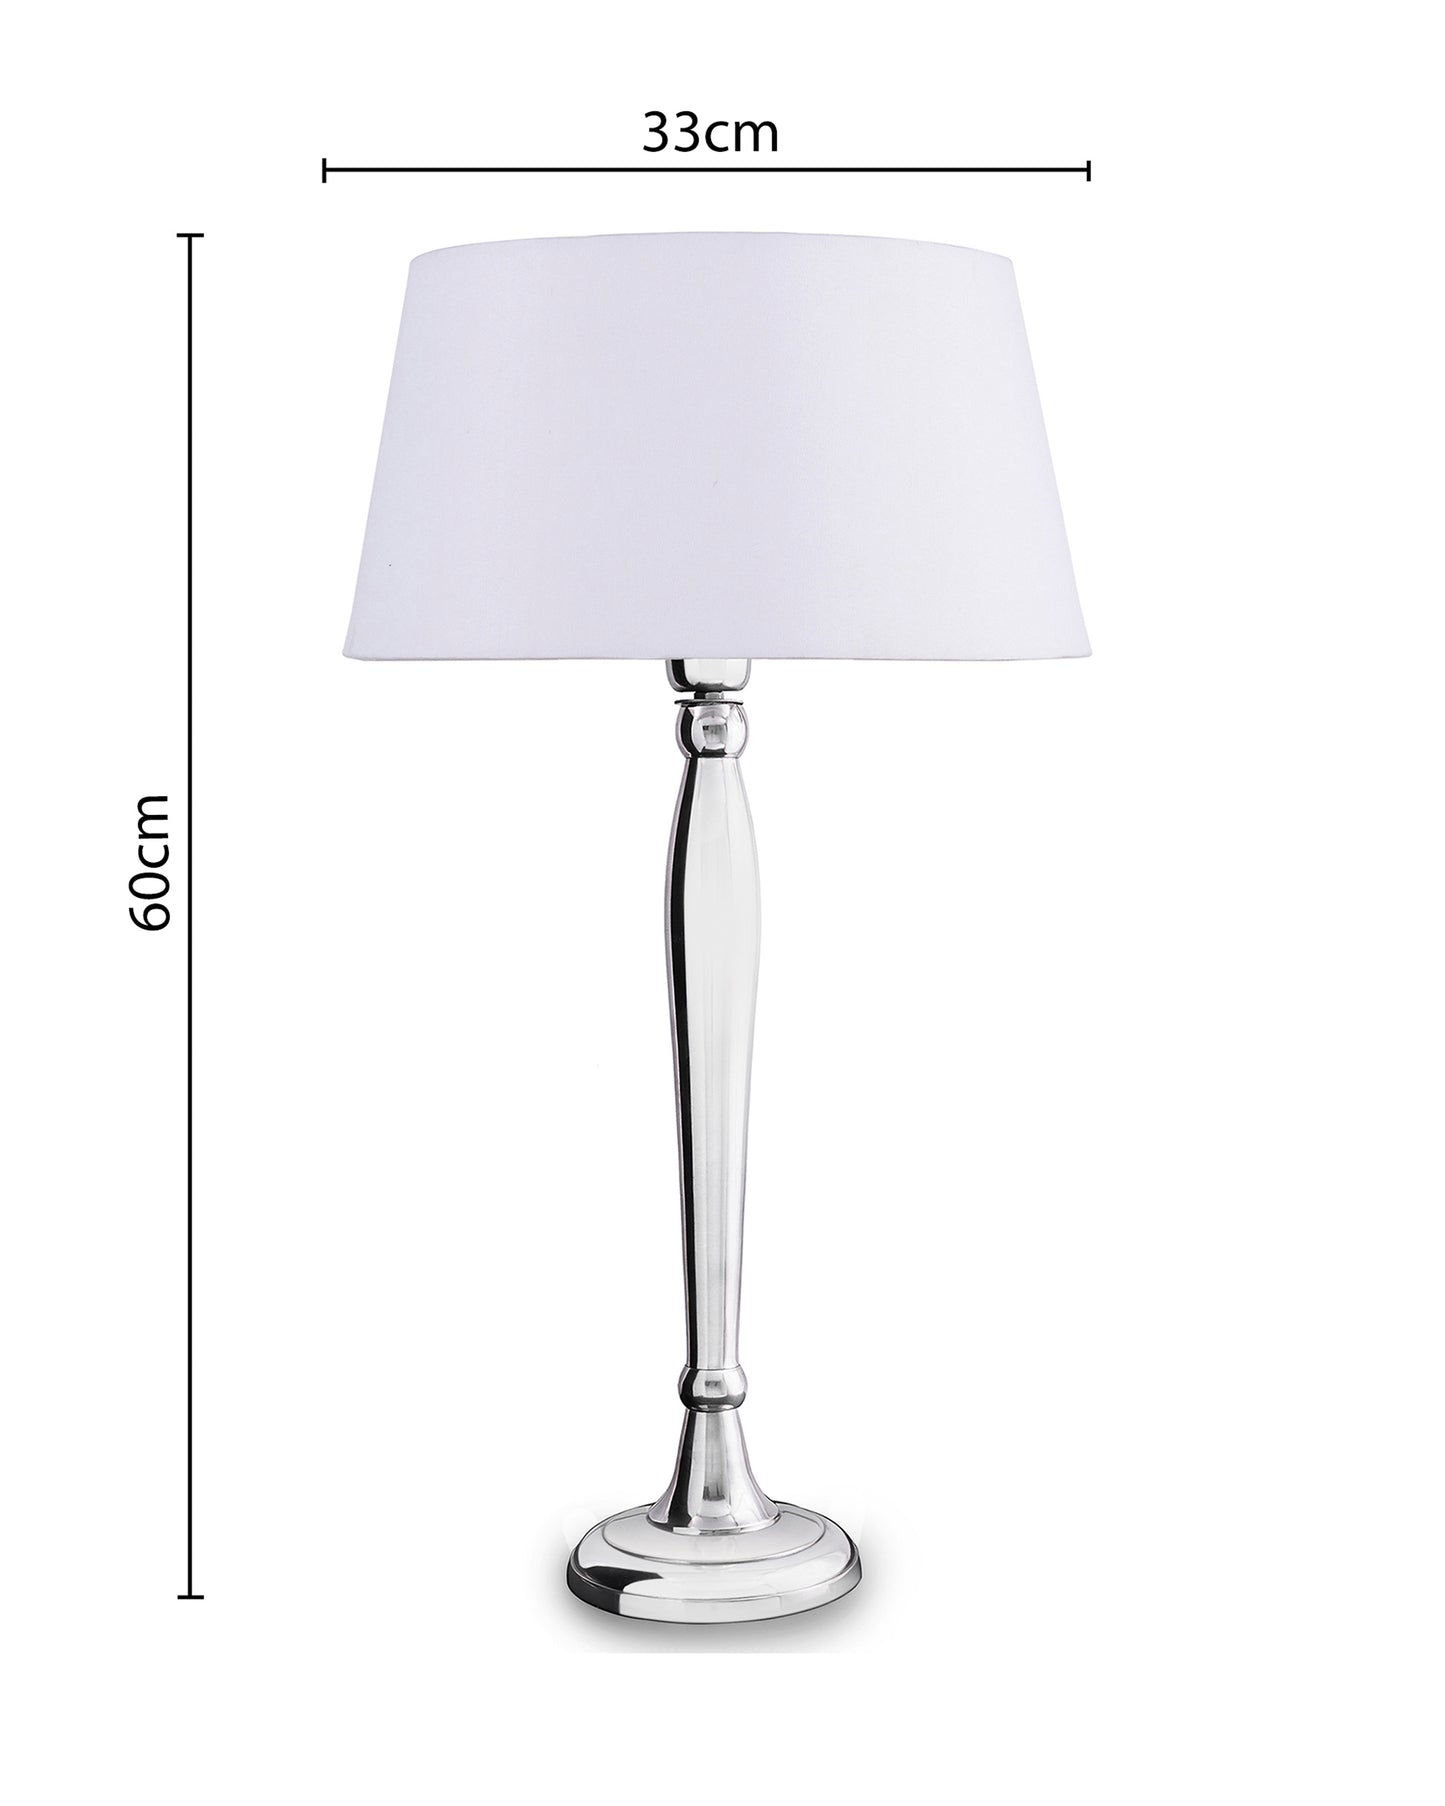 Royal Ovoid chrome lamp with shade